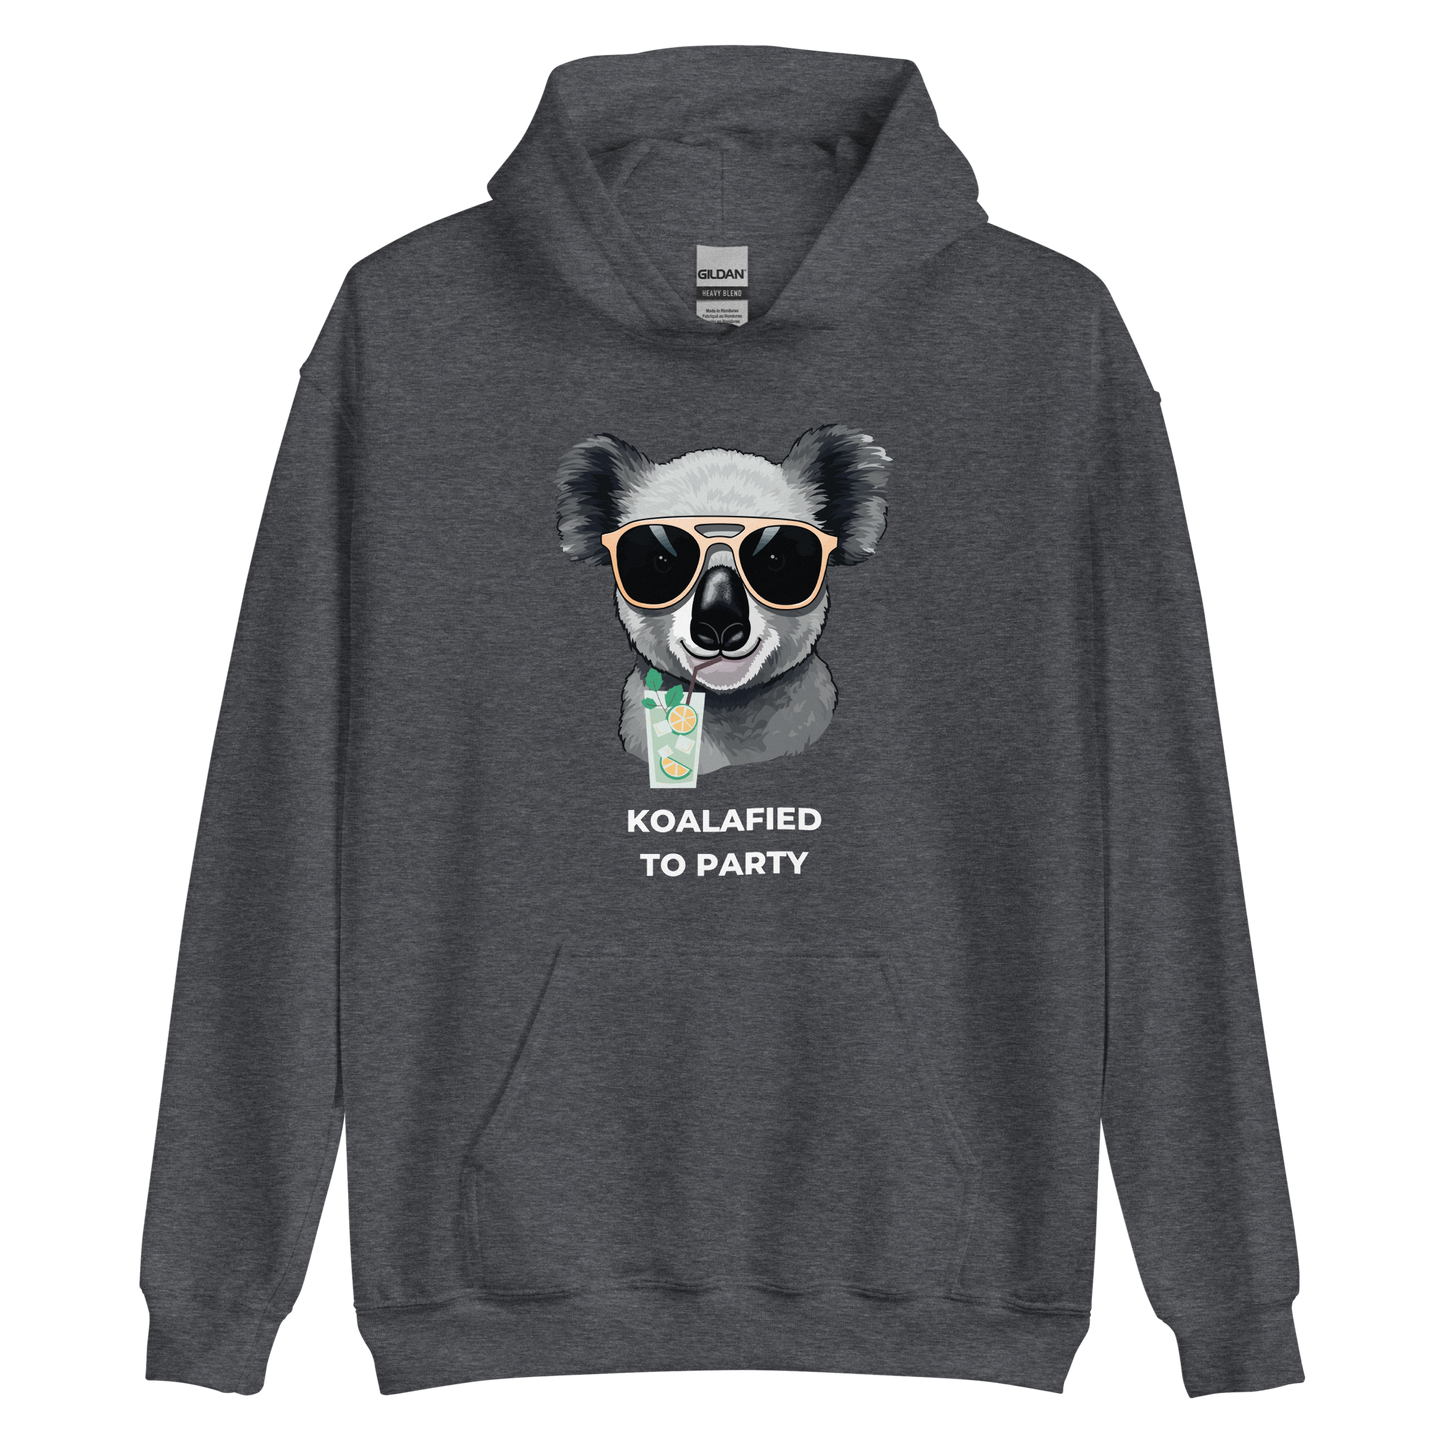 Dark Heather Koala Hoodie featuring a captivating Koalafied To Party graphic on the chest - Funny Graphic Koala Hoodies - Boozy Fox